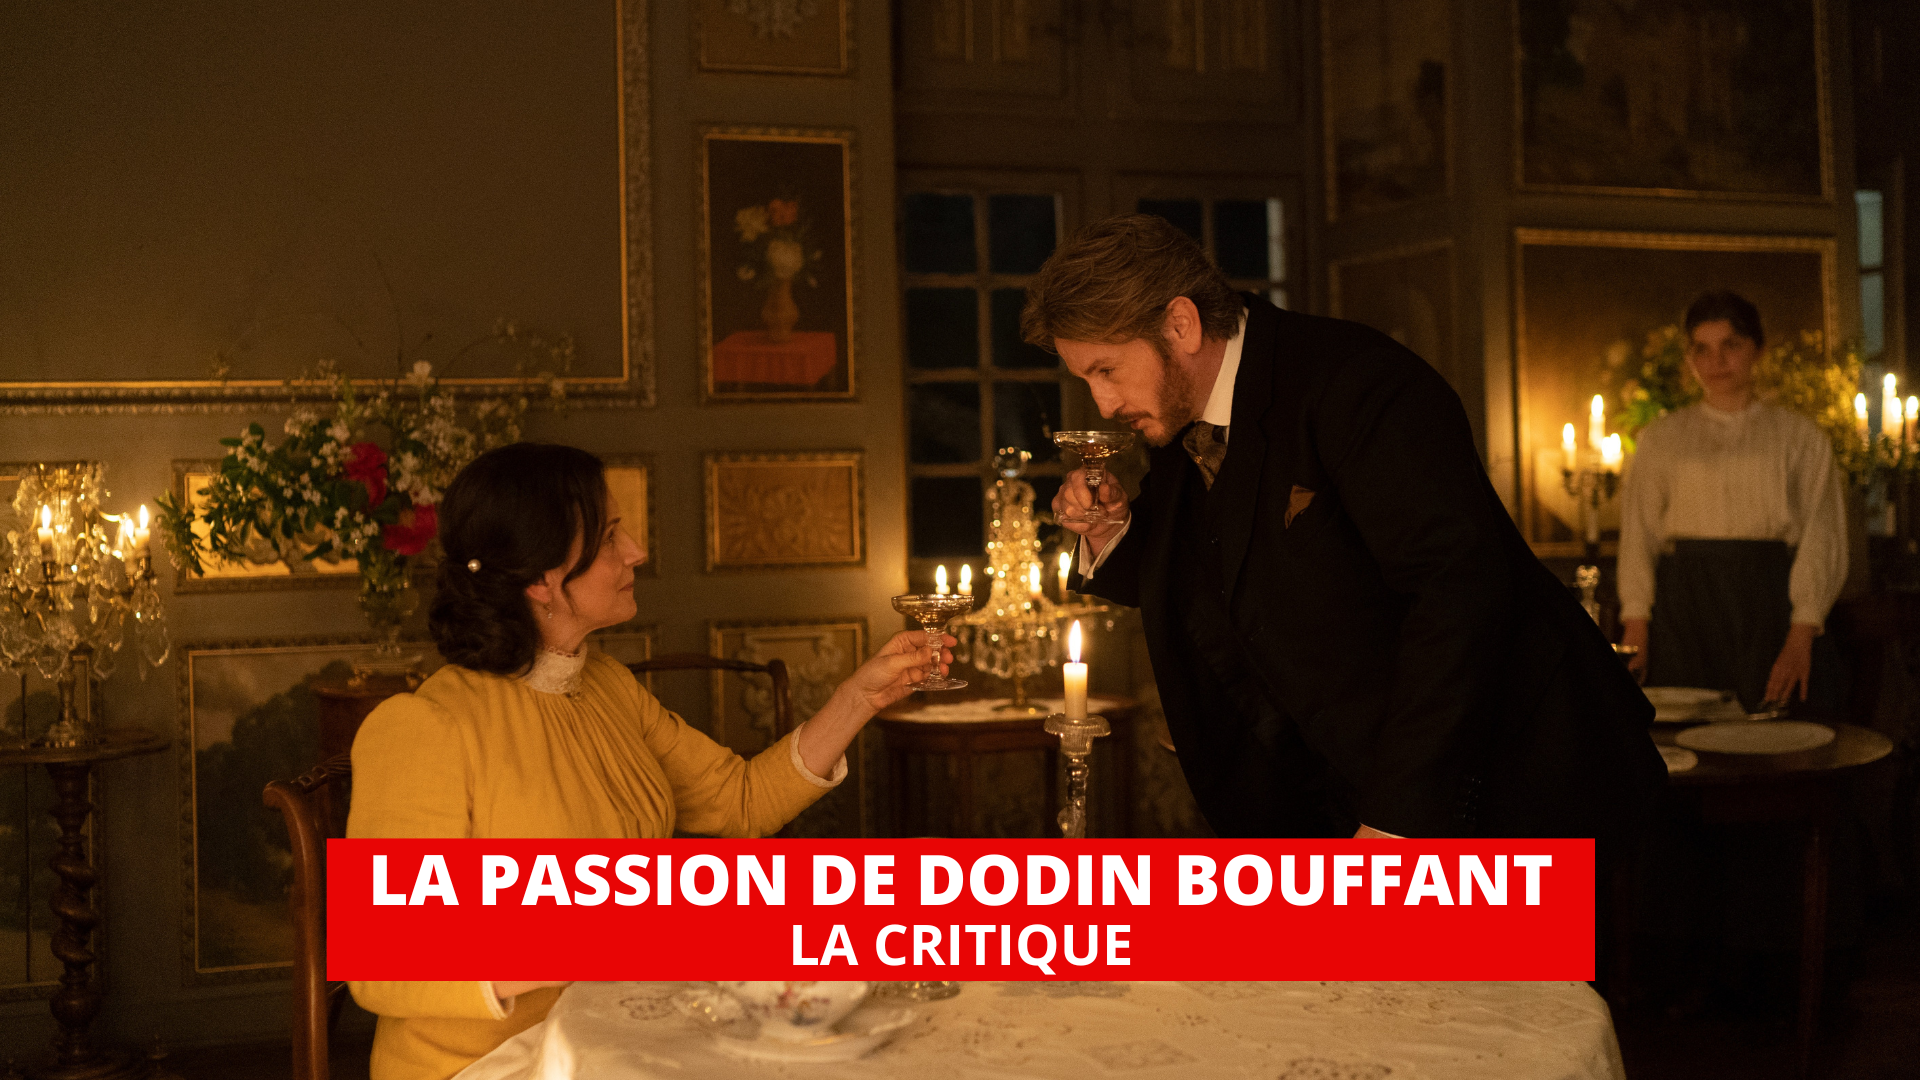 The passion of Dodin Bouffant: Juliette Binoche and Benoît Magimel at the top